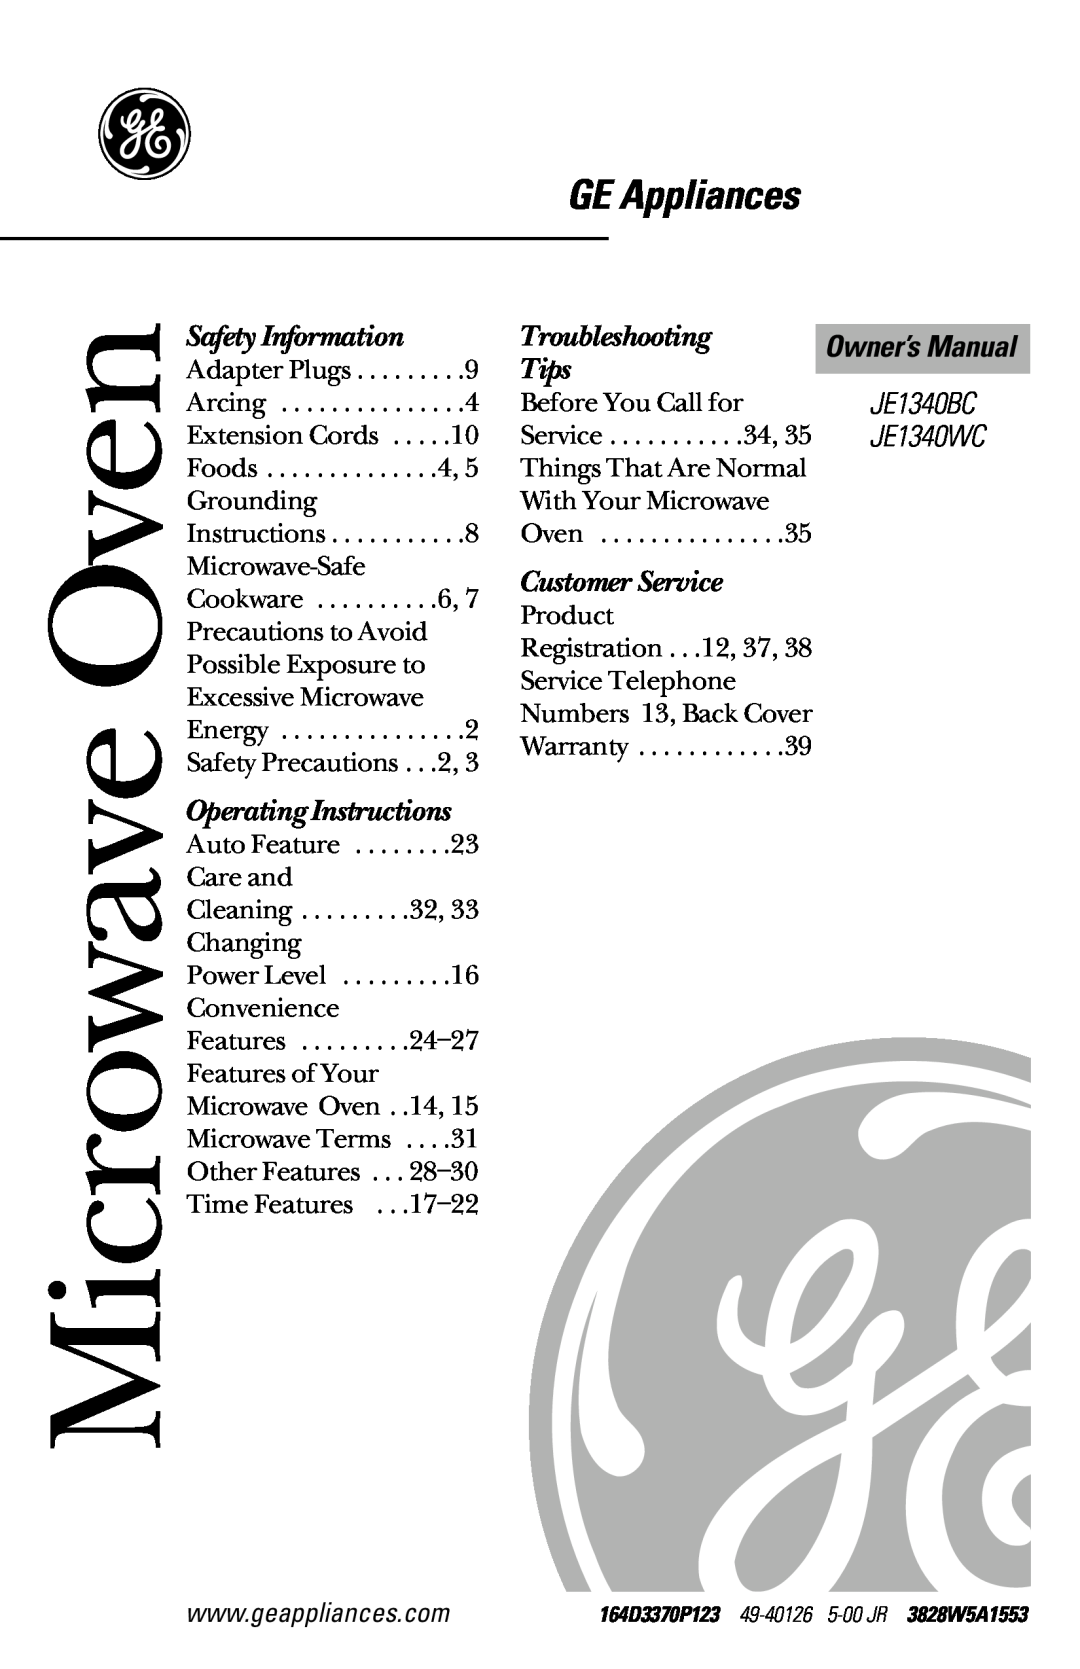 GE owner manual GE Appliances, JE1340BC JE1340WC, Oven, Microwave, Safety Information, Troubleshooting, Tips 